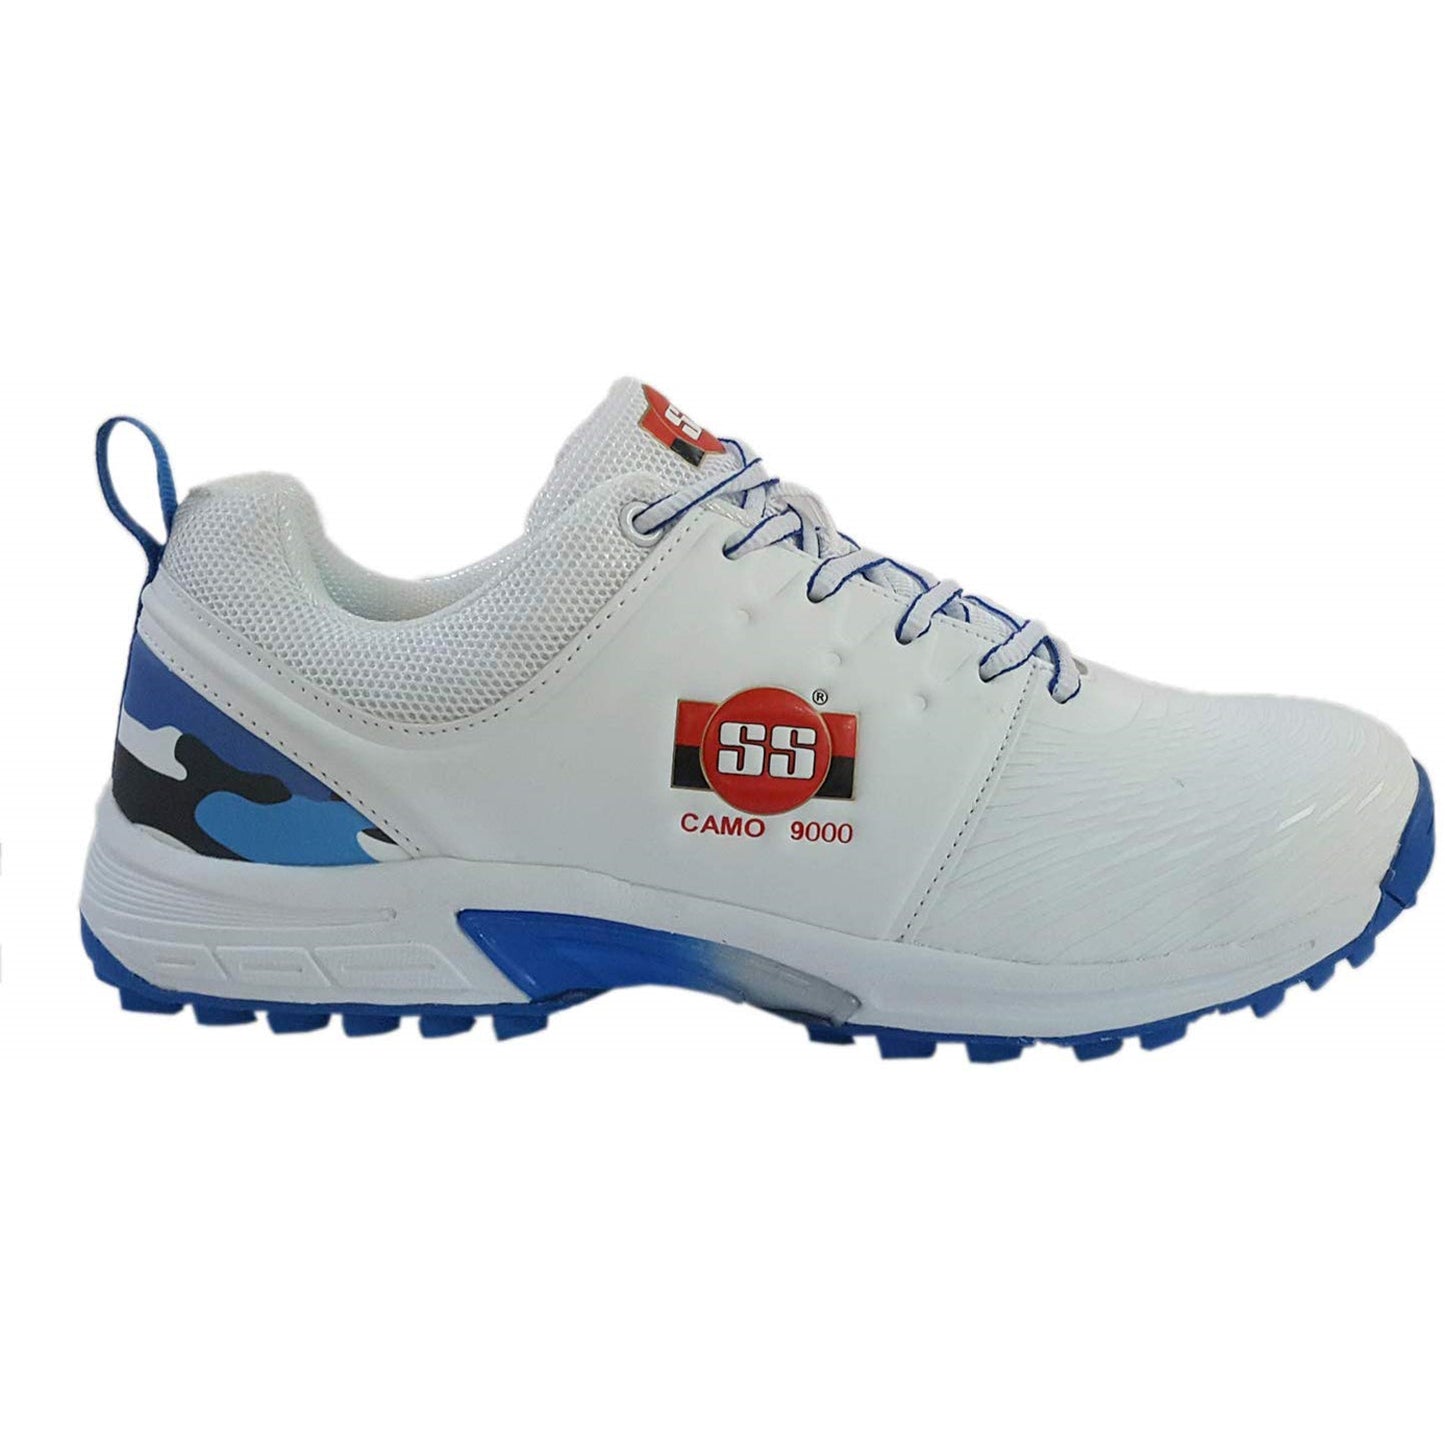 SS Rubber Spikes Professional Cricket Shoes for Men - Camo - White Blue - Best Price online Prokicksports.com